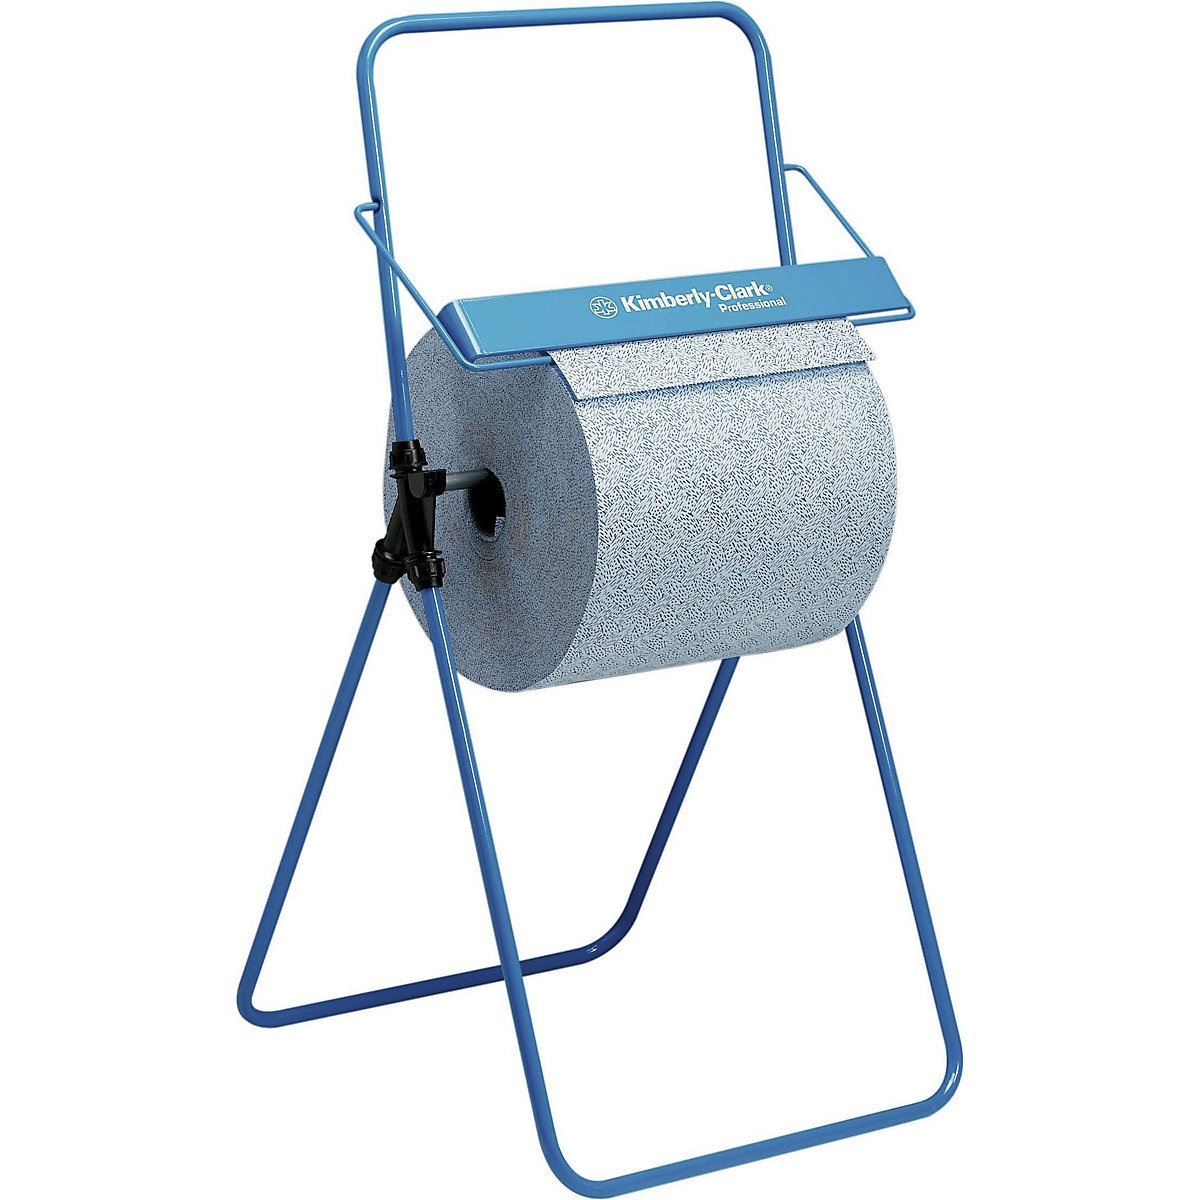 Industrial cleaning paper floor stand - Kimberly-Clark